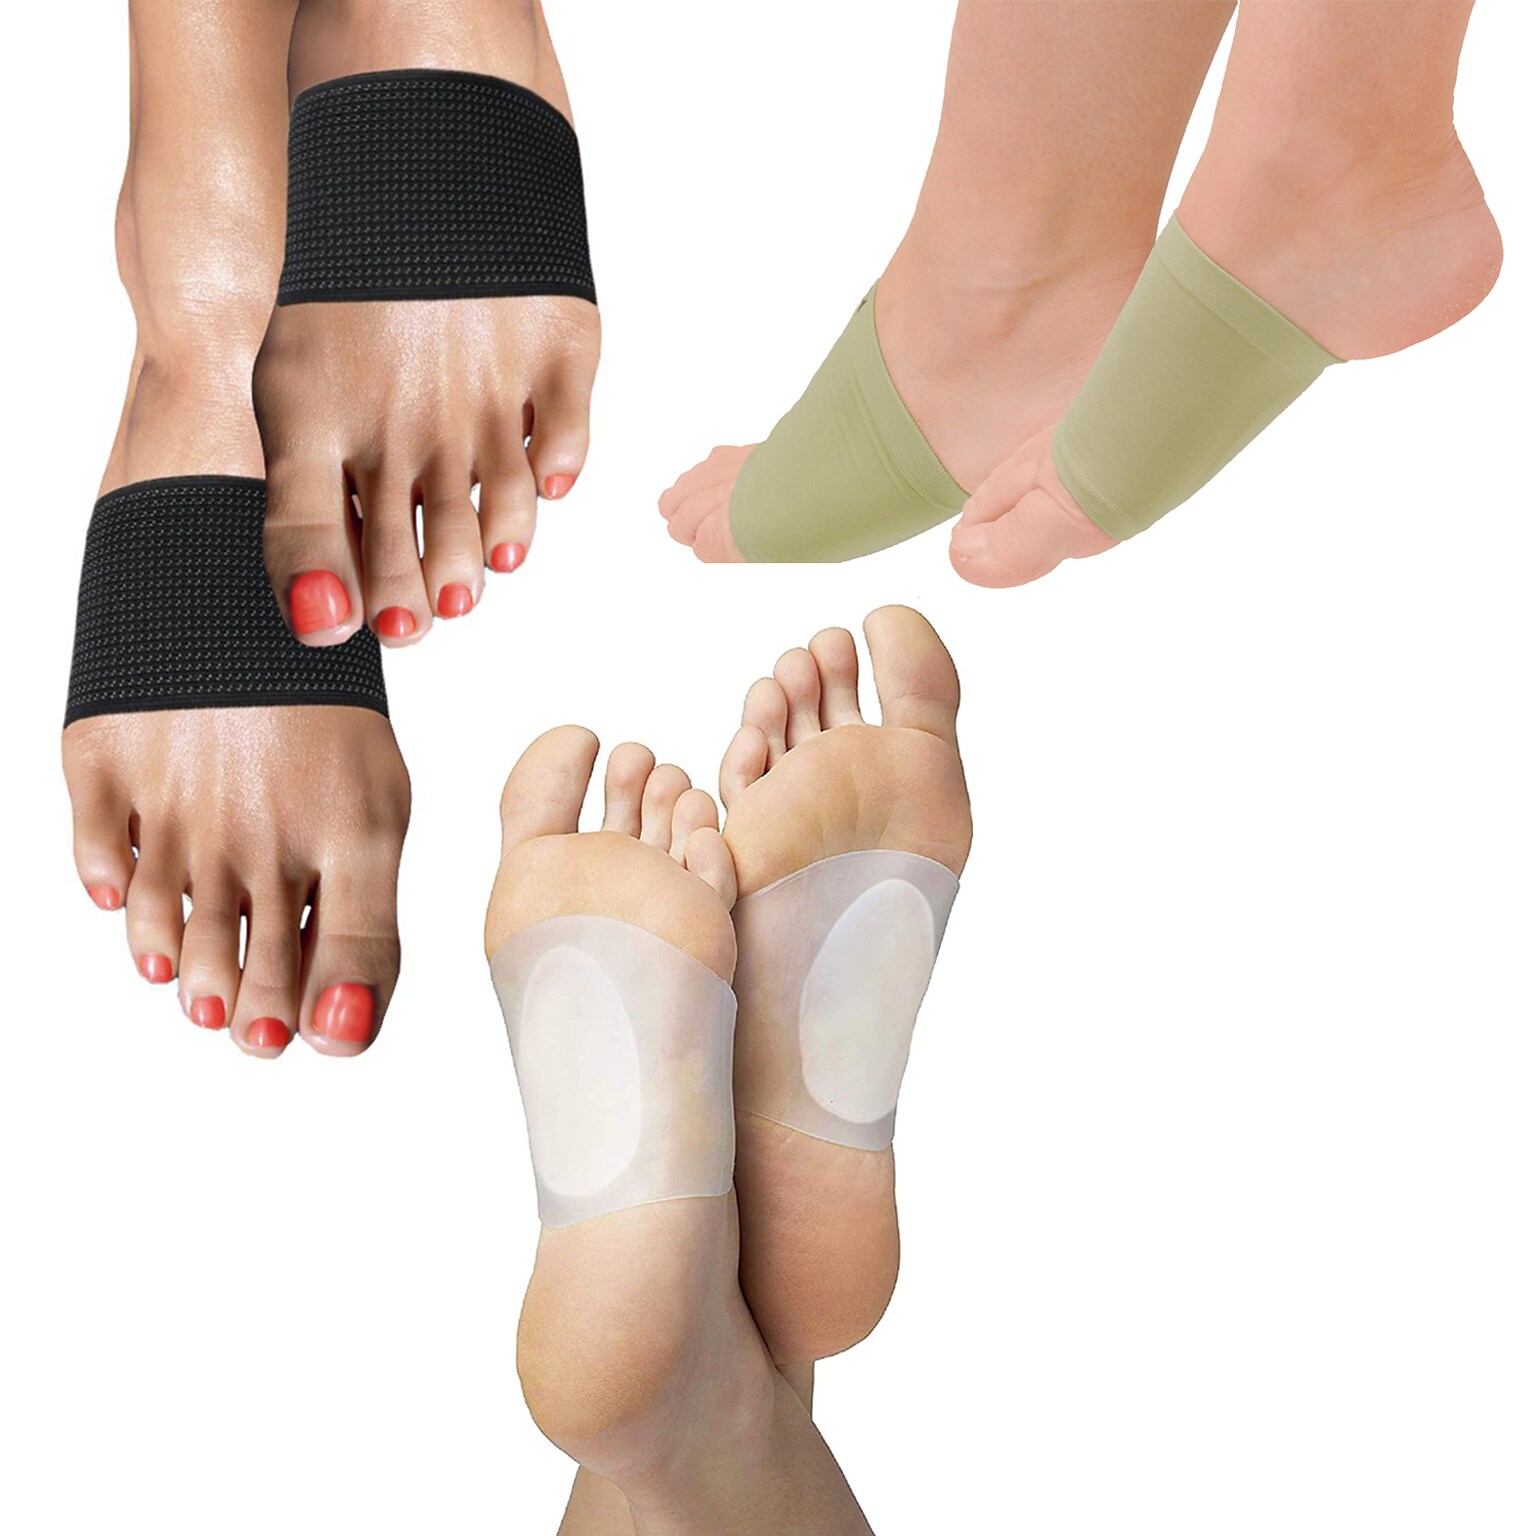 Extreme Fit Nylon Foot Support Compression, Large/XL, 3 Pairs/Pack (BUN-BLAAS-L-814)